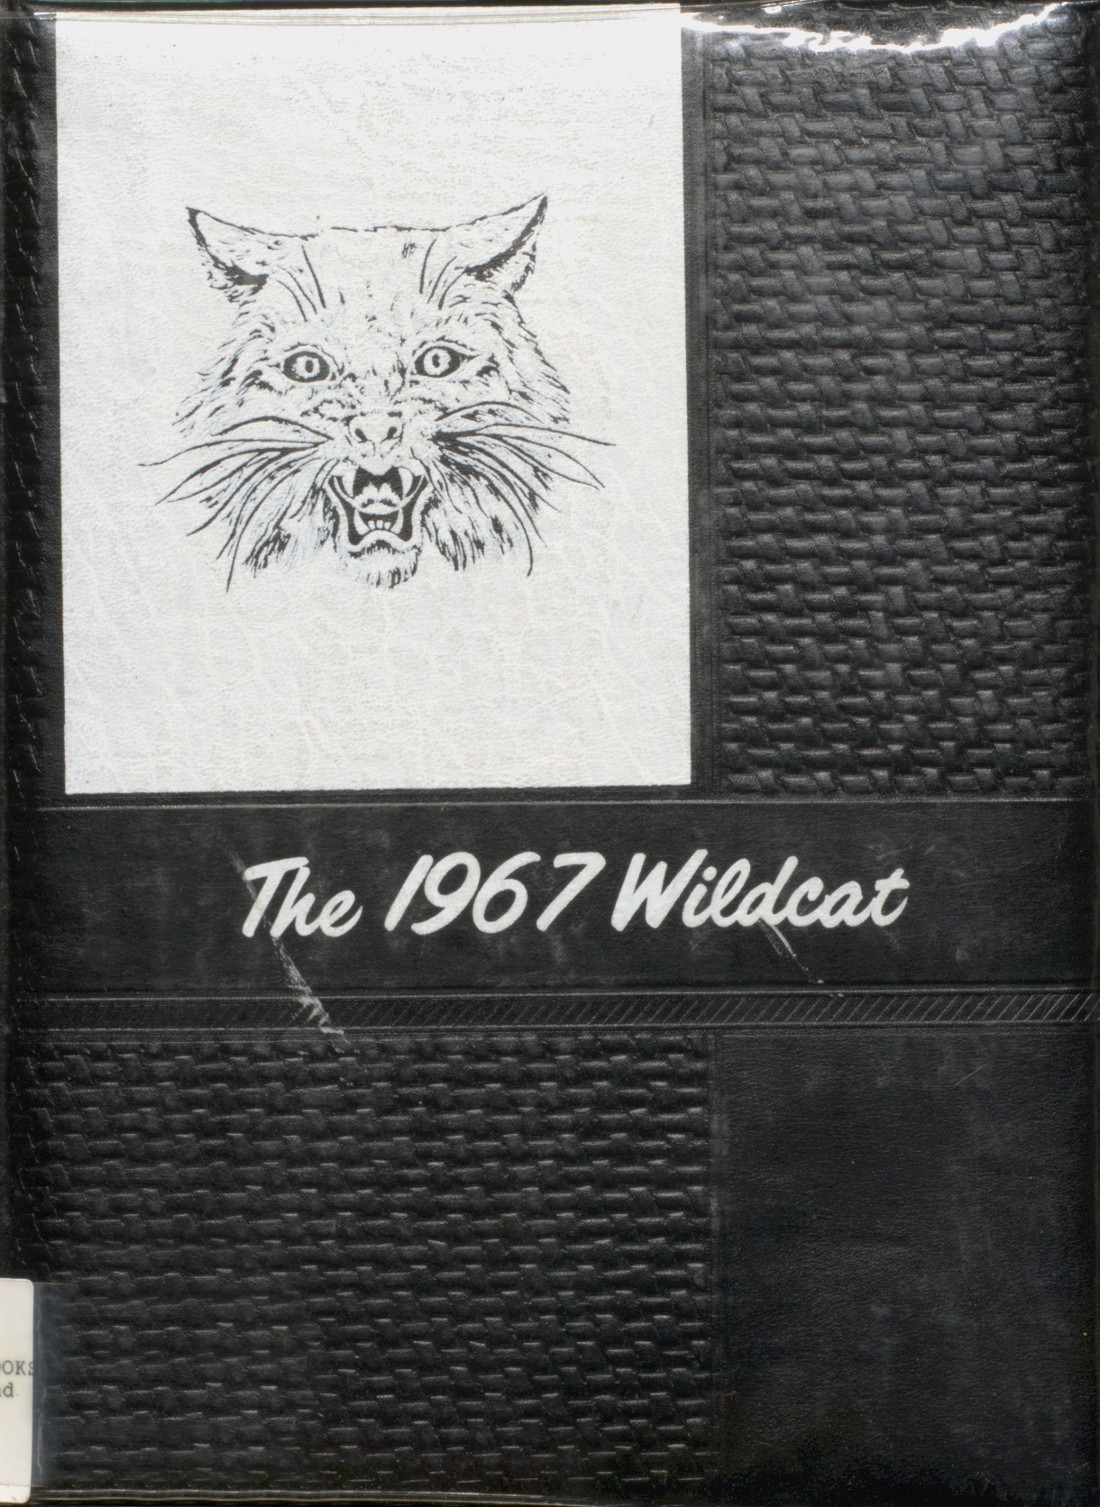 1967 yearbook from Diamond High School from Diamond, Missouri for sale